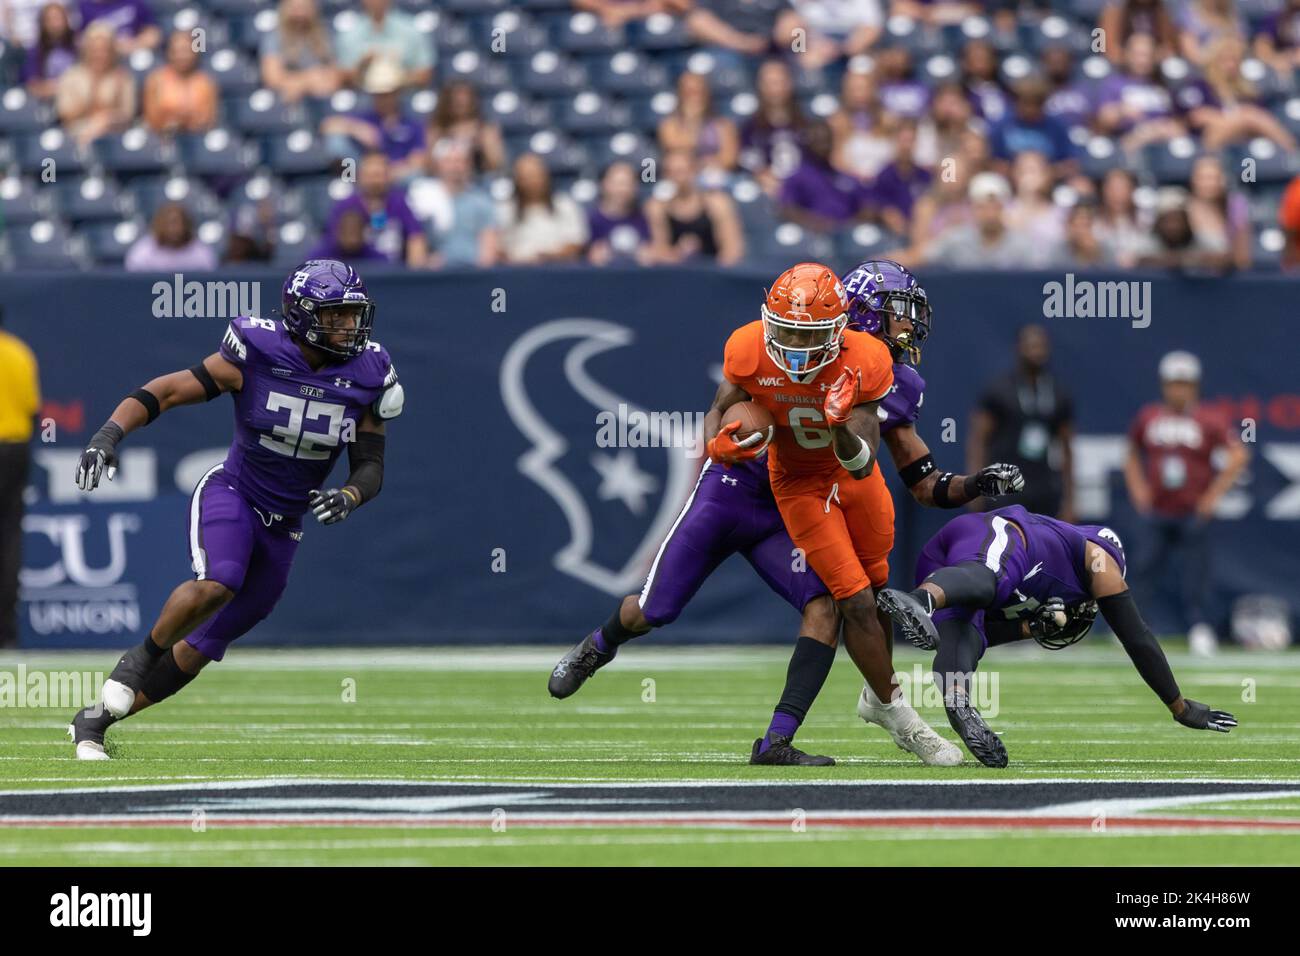 Sam Houston State Bearkats wide receiver Noah Smith (6) makes a catch as a trio of Stephen F. Austin Lumberjacks defenders close in for the tackle, Sa Stock Photo